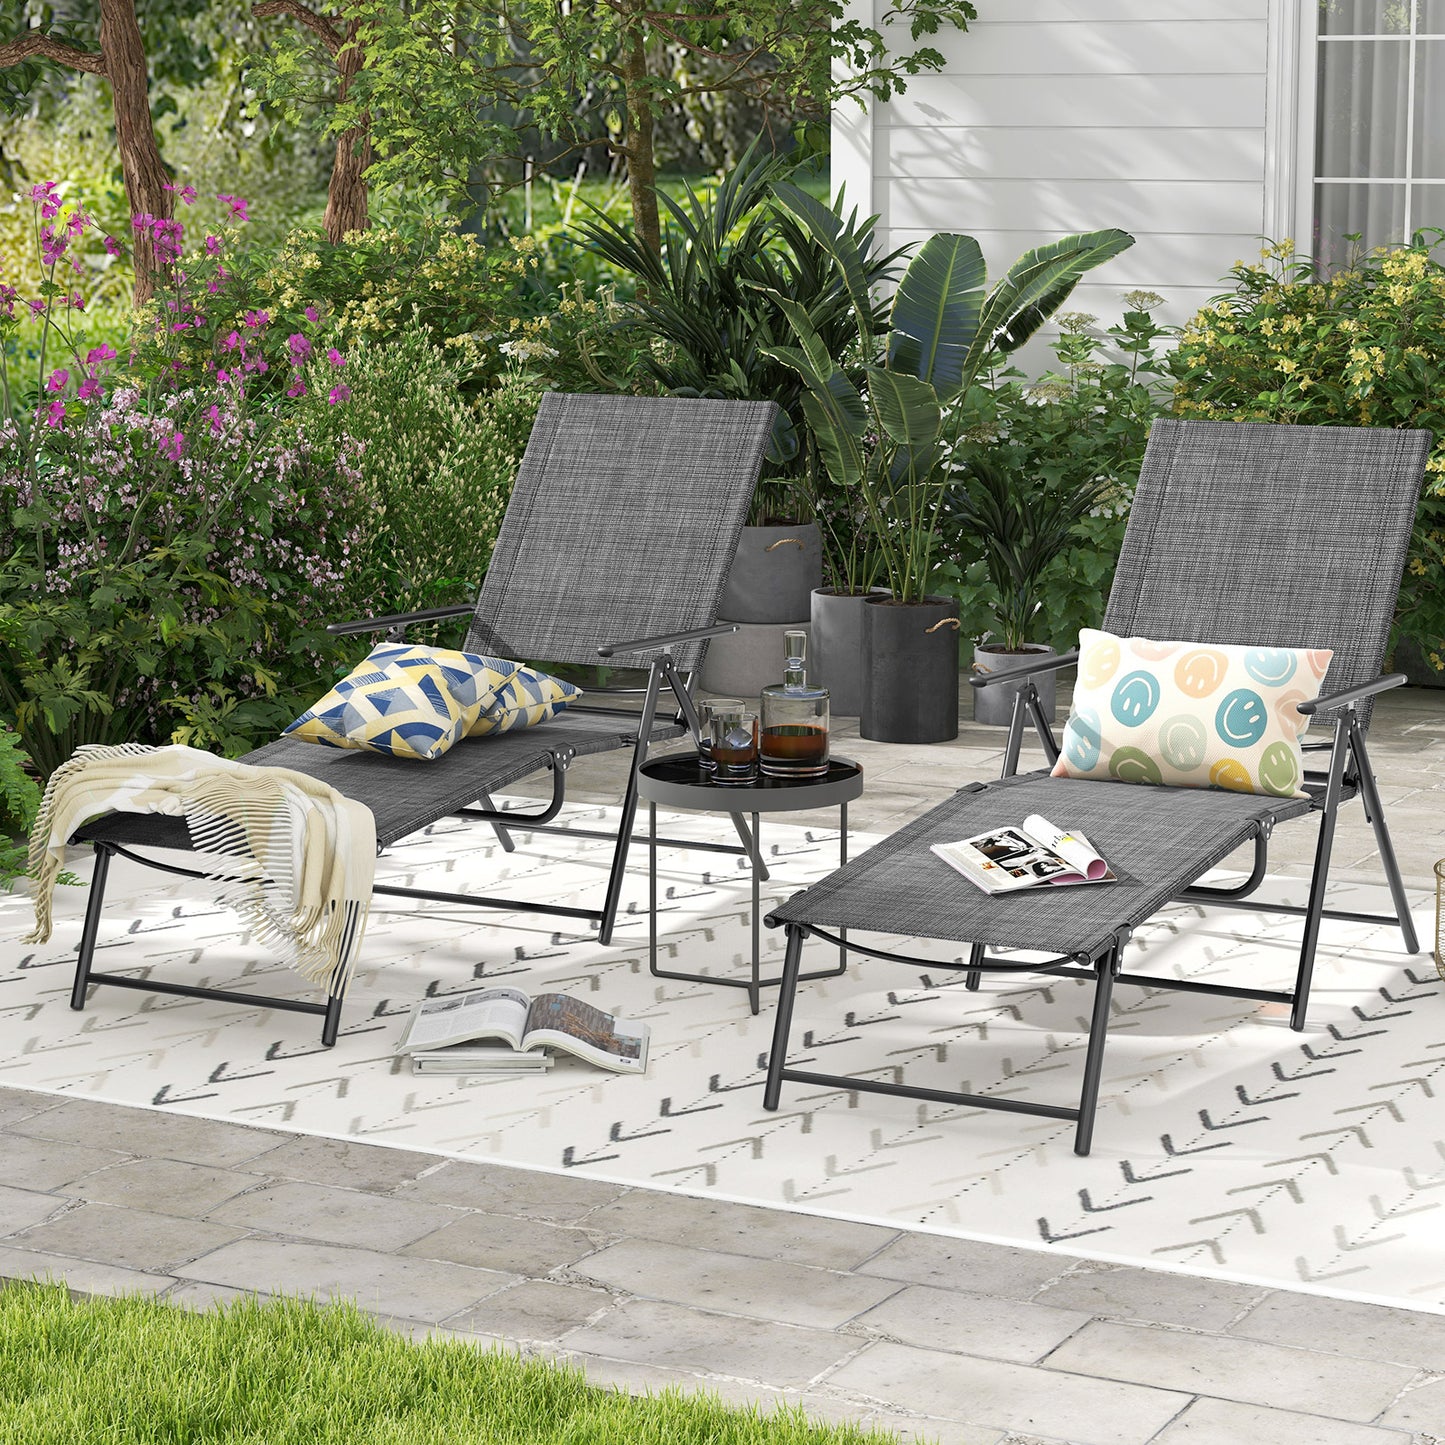 2 Piece Patio Folding Chaise Lounge Chairs Recliner with 6-Level Backrest-Gray